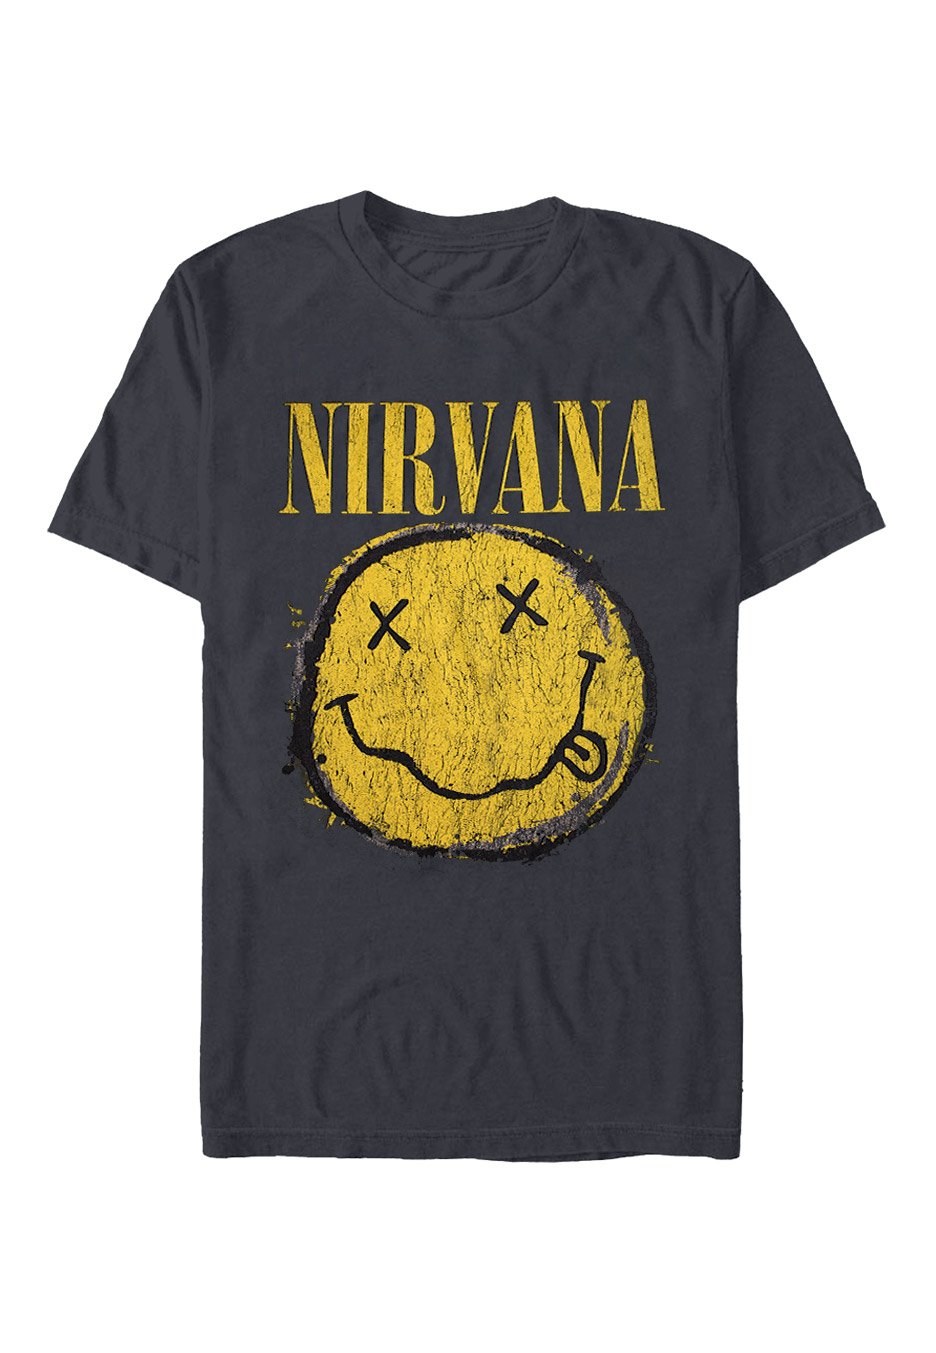 Nirvana - Worn Out Happy Face Charcoal - T-Shirt